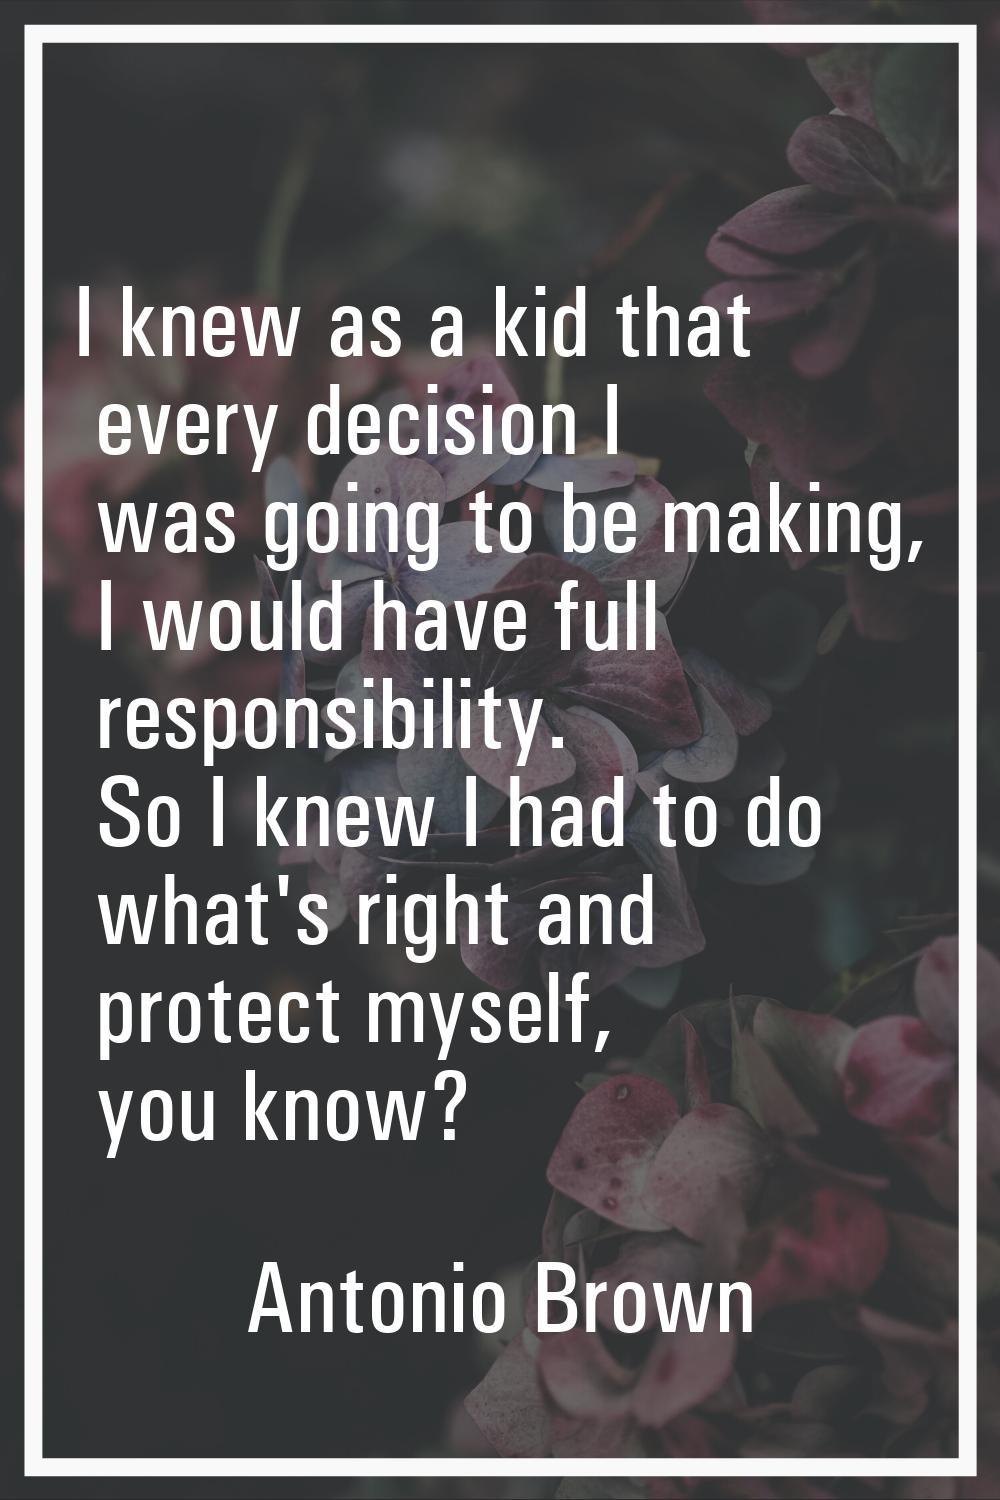 I knew as a kid that every decision I was going to be making, I would have full responsibility. So 